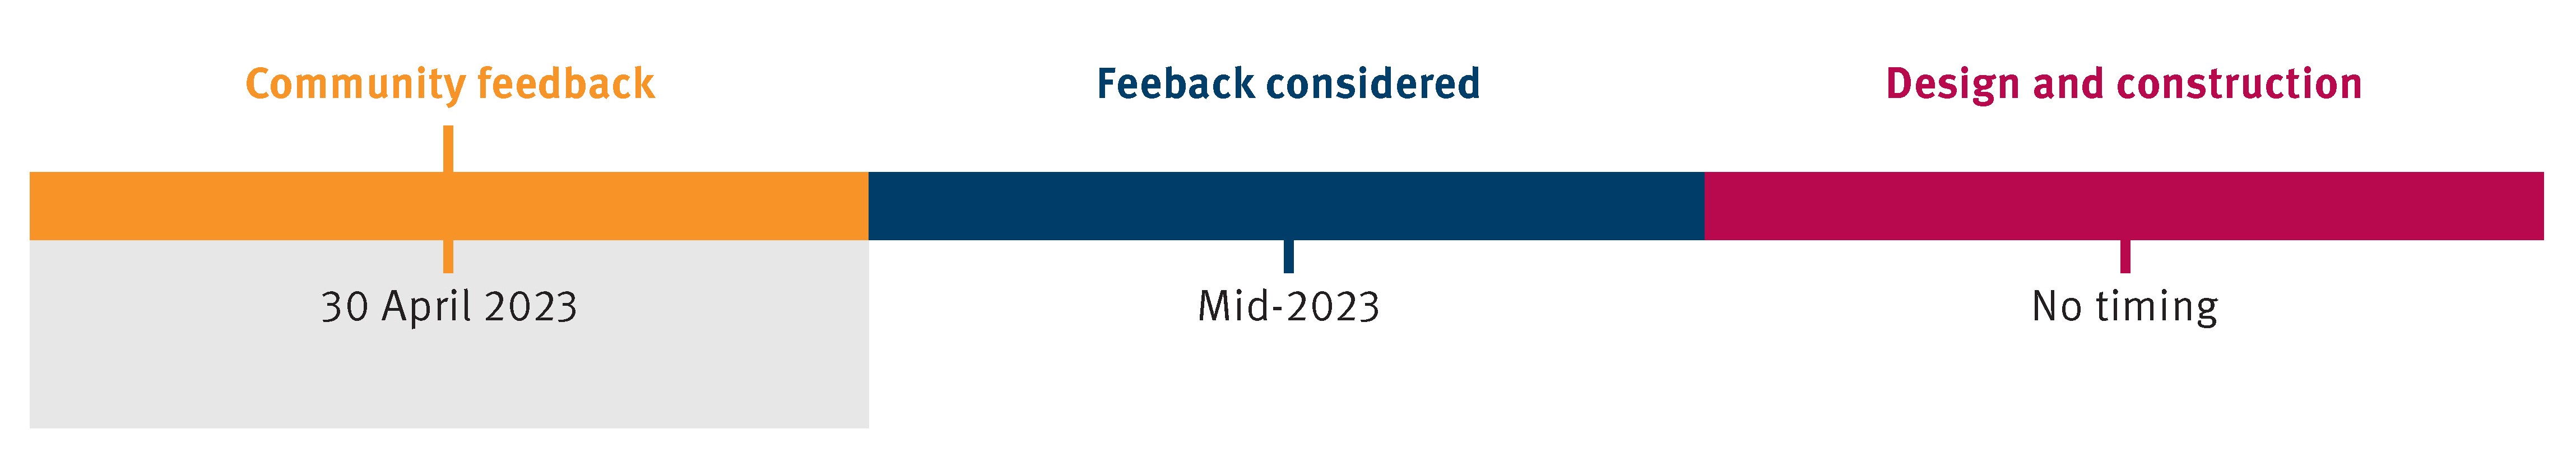 Project timeline: Community feedback: 30 April 2023, Feedback considered: mid-2023, Design and construction: No timing